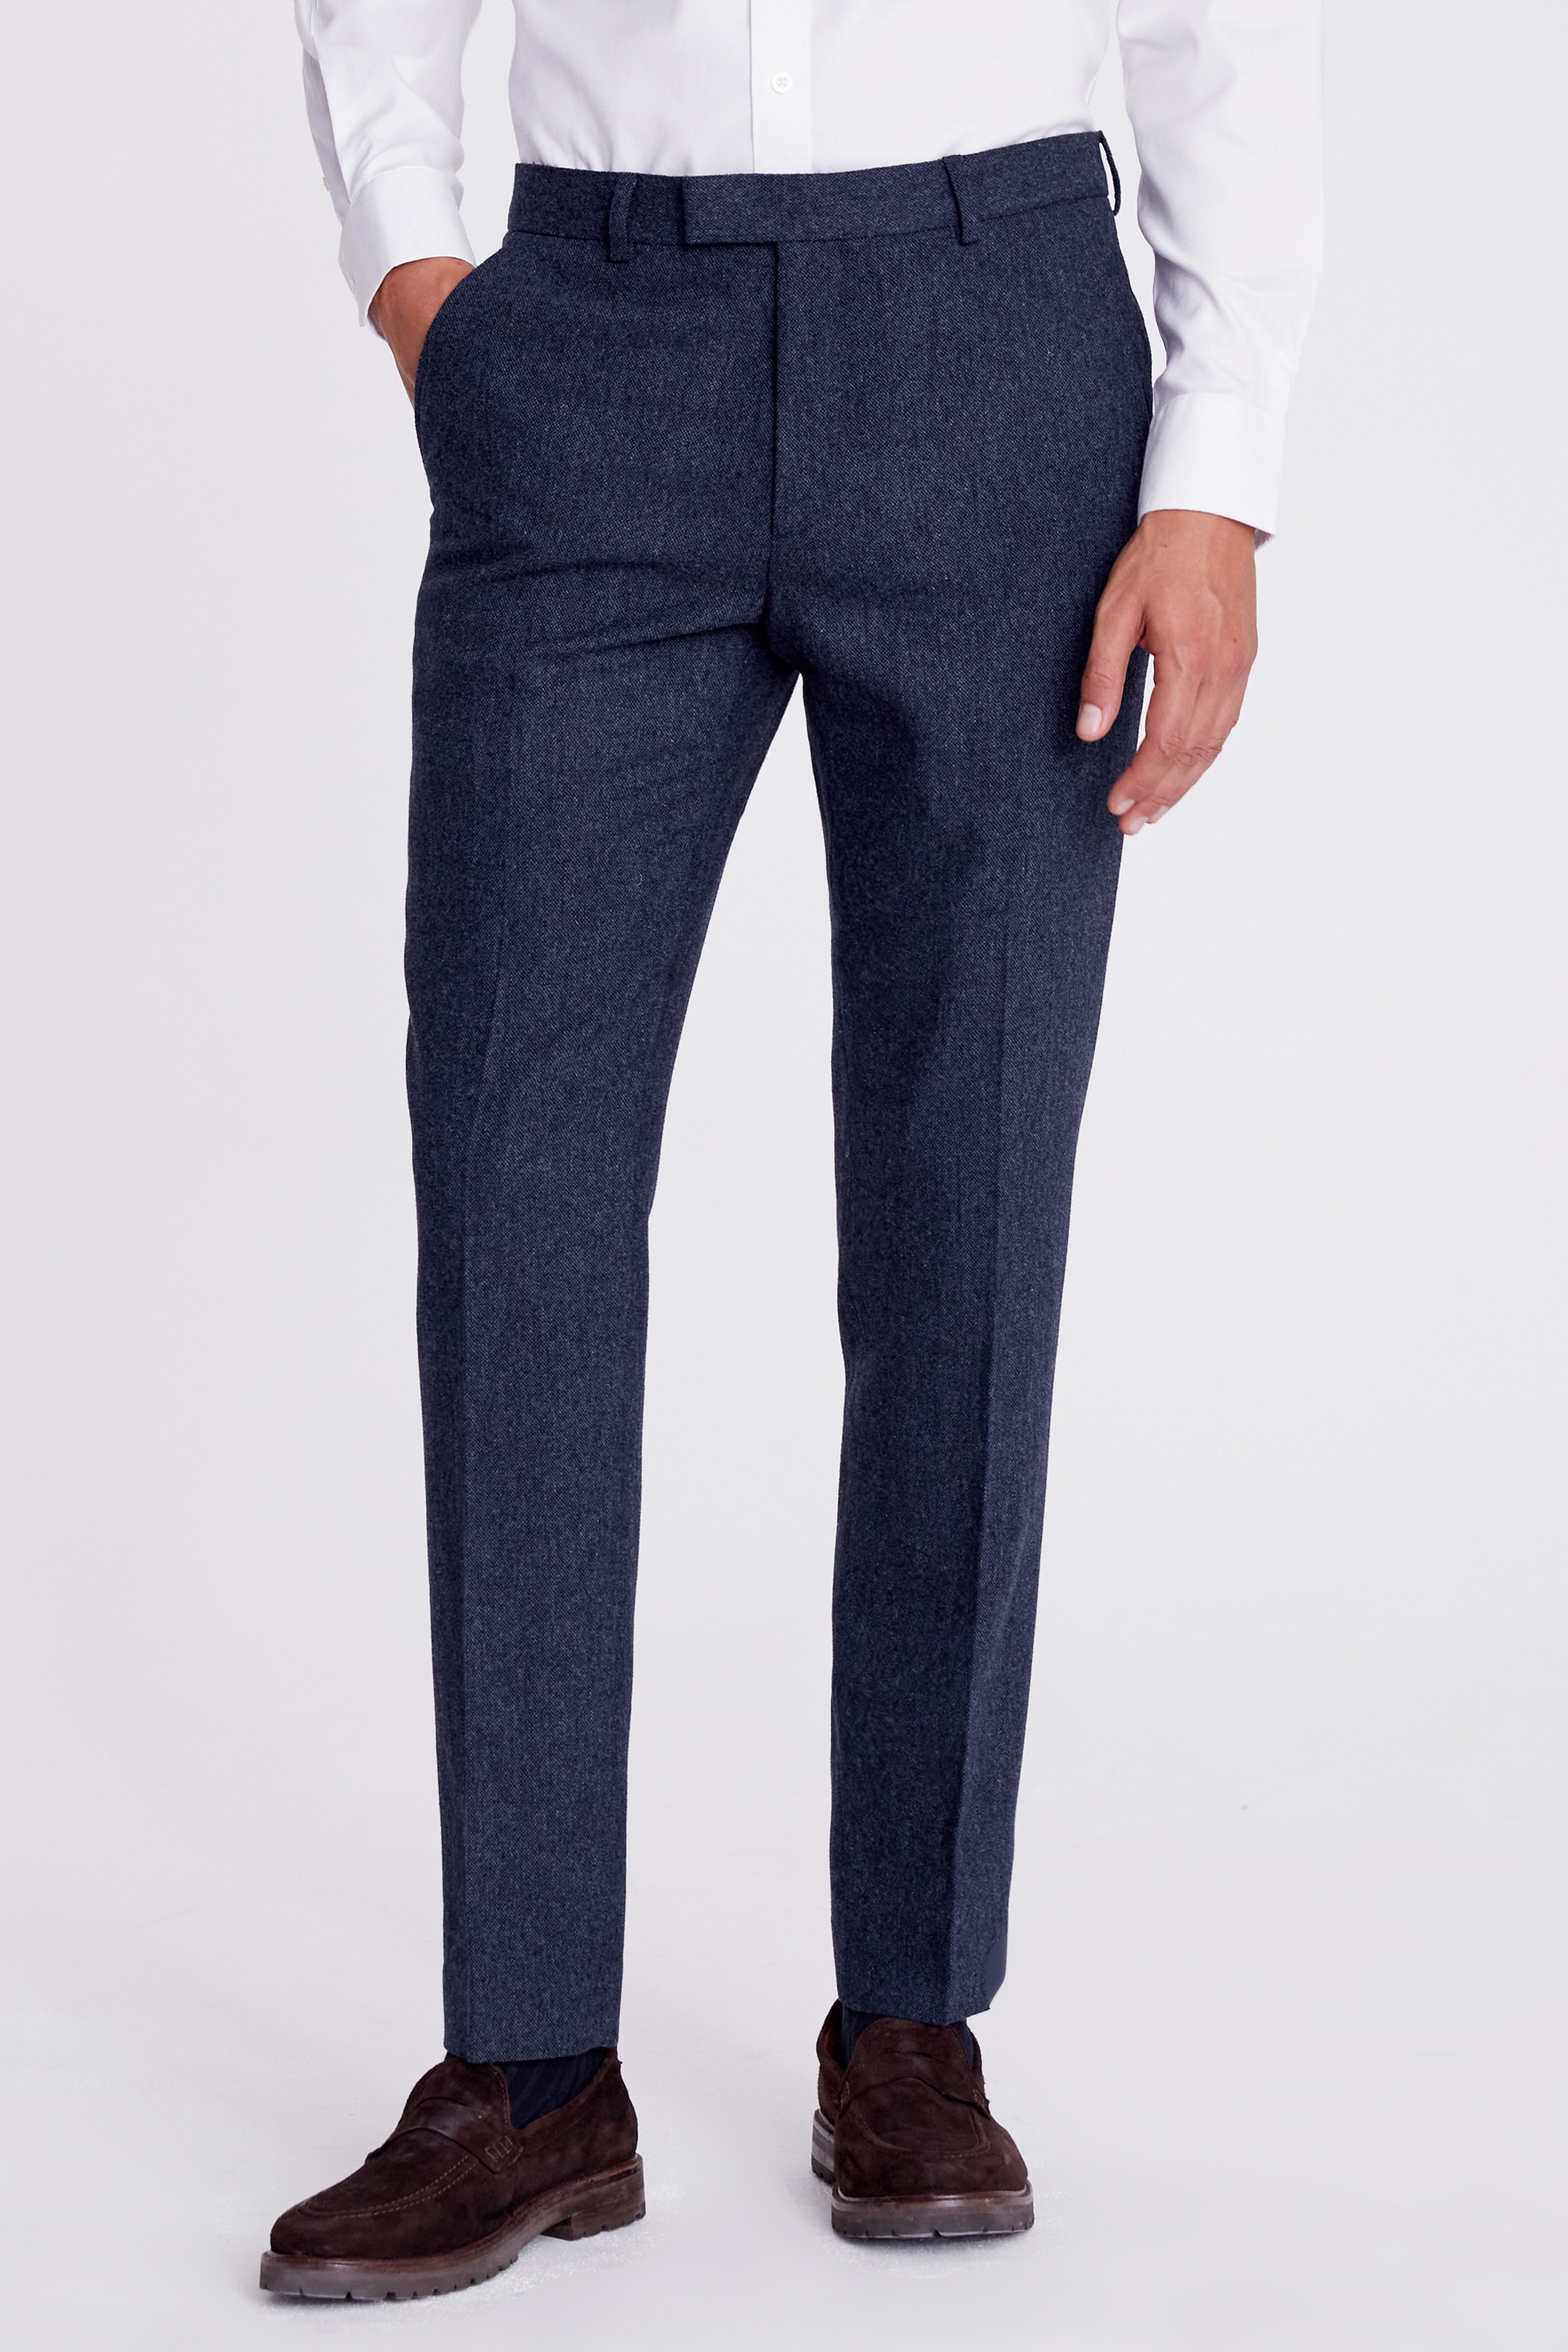 Slim Fit Blue Donegal Trousers | Buy Online at Moss